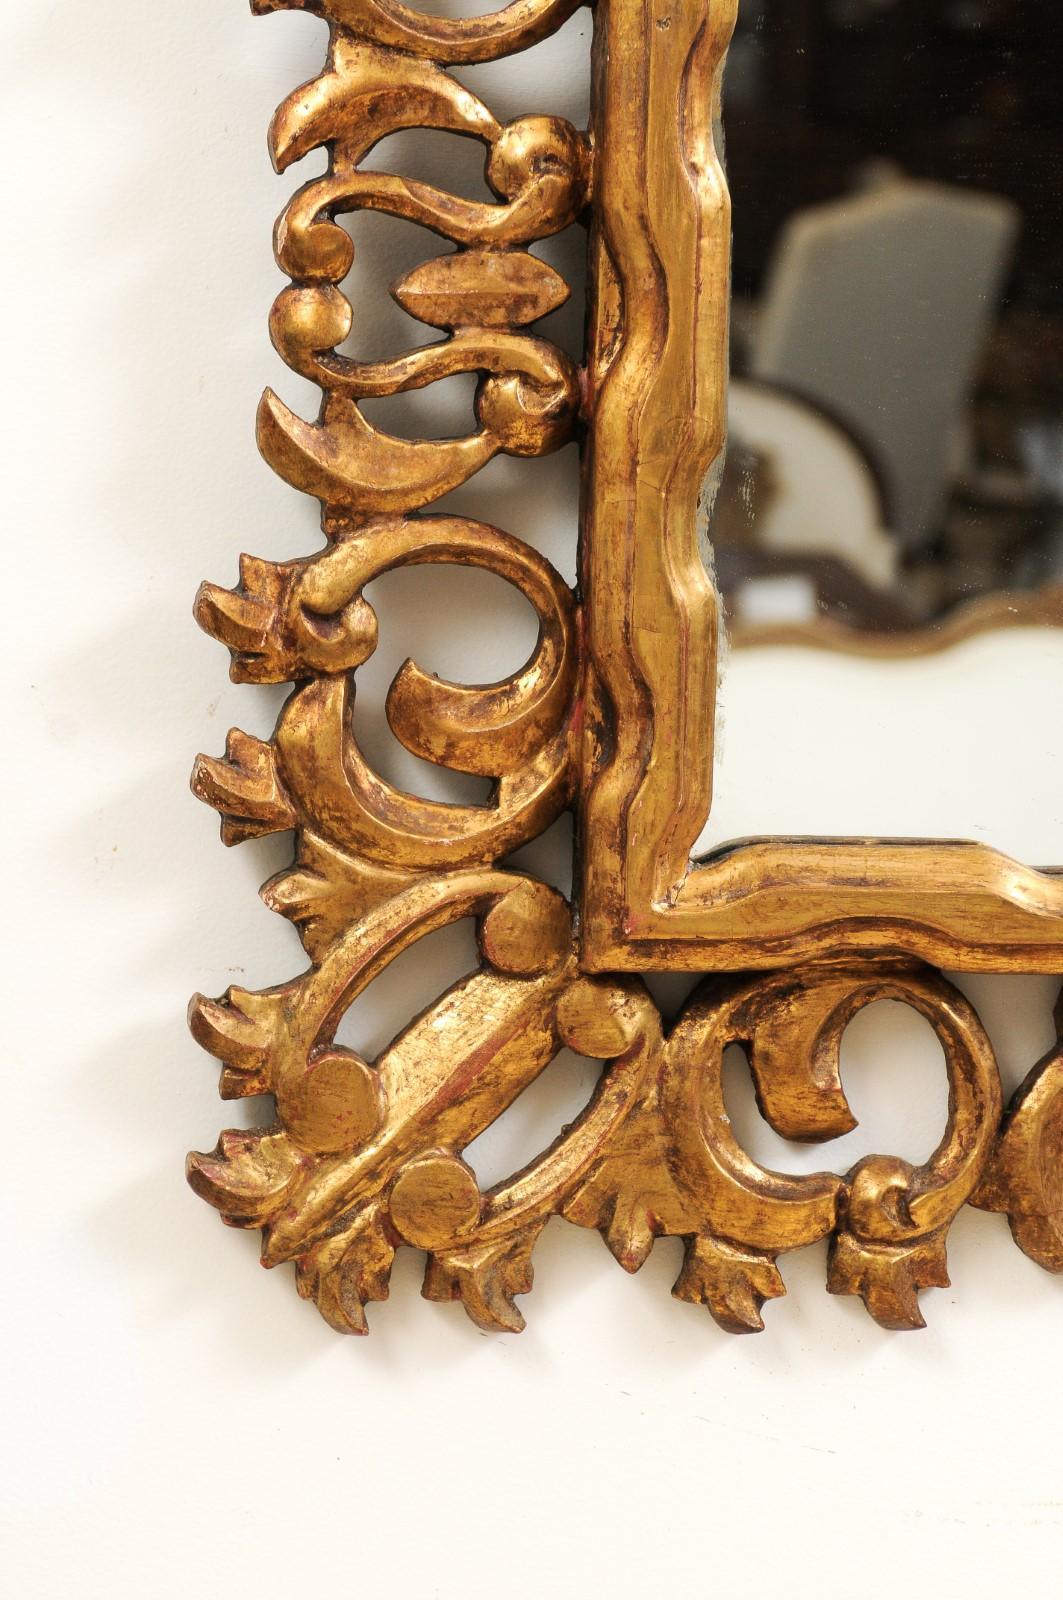 Florentine 20th Century Carved Giltwood Mirror with C-Scrolls and Foliage Motifs For Sale 4